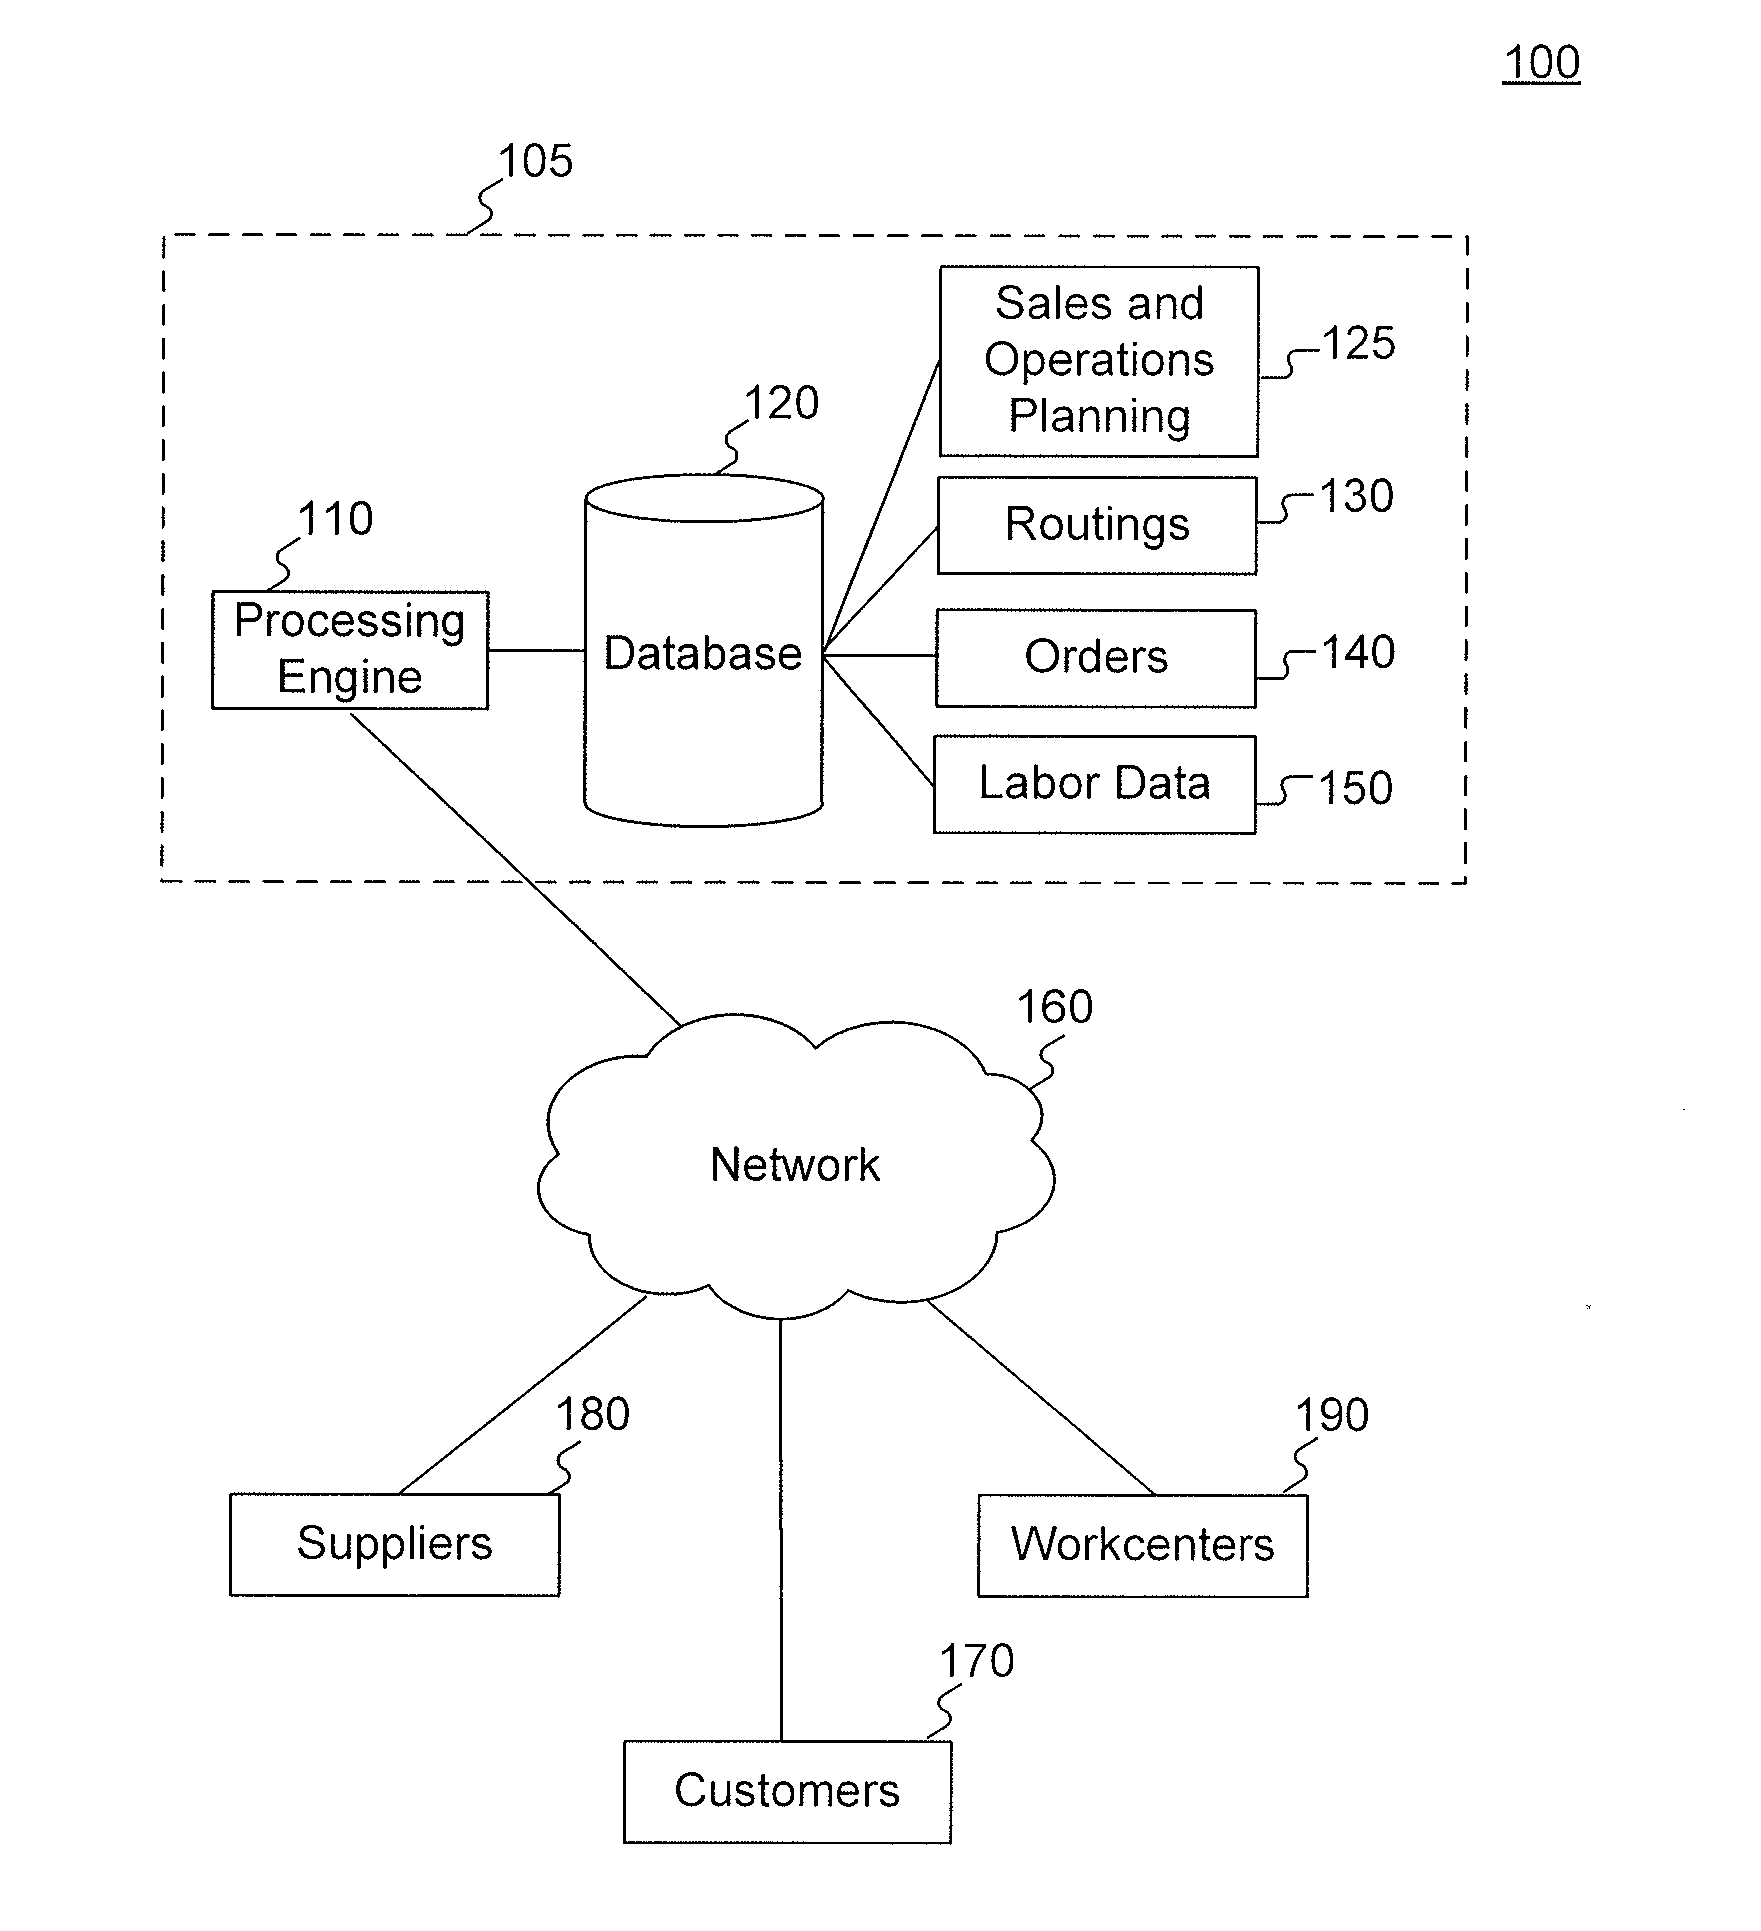 Systems and methods for balancing an assembly line